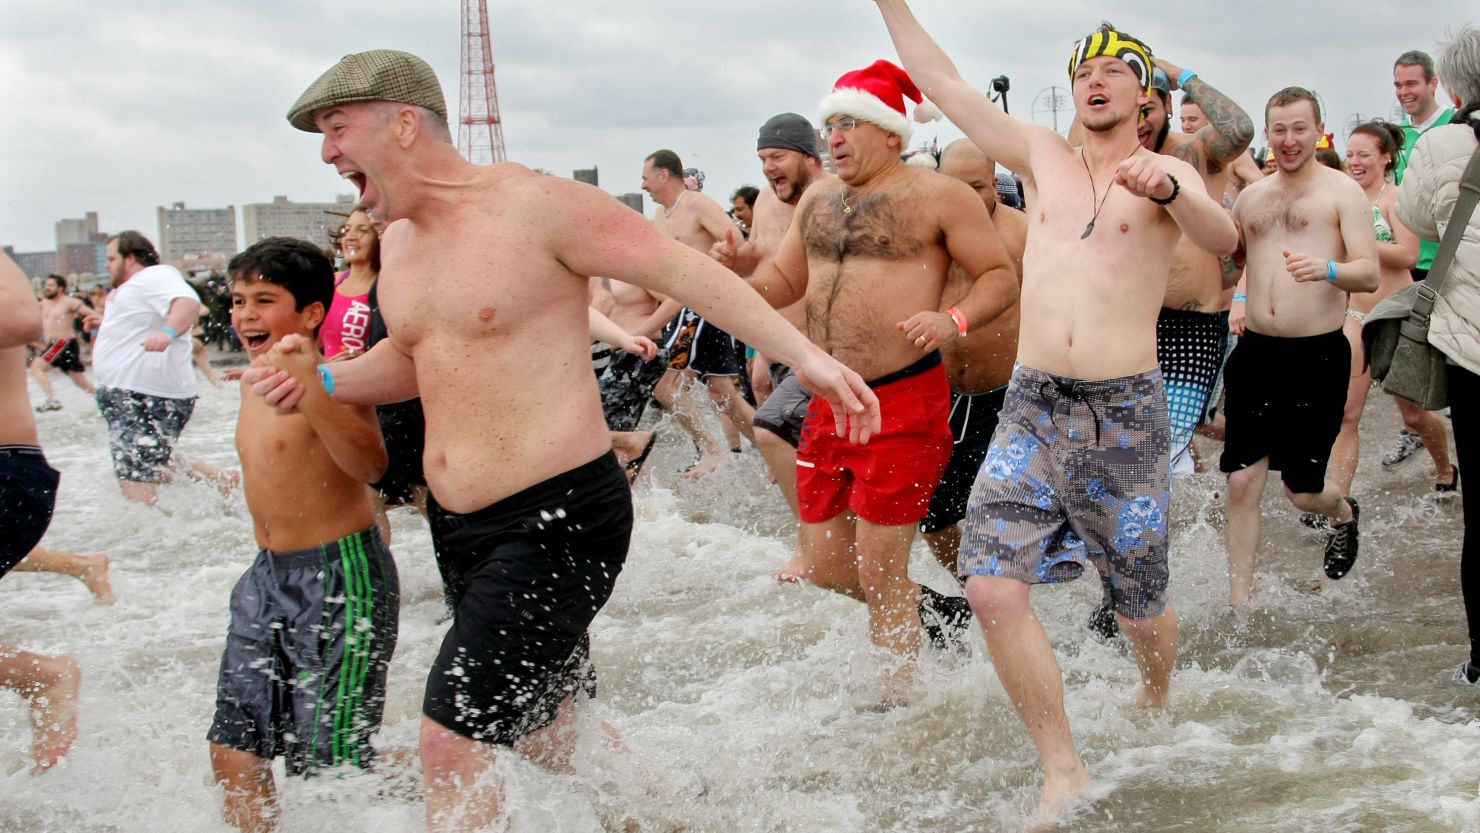 People run into the water for Coney Island Polar Bear Club's New Year's Day swim in 2013.